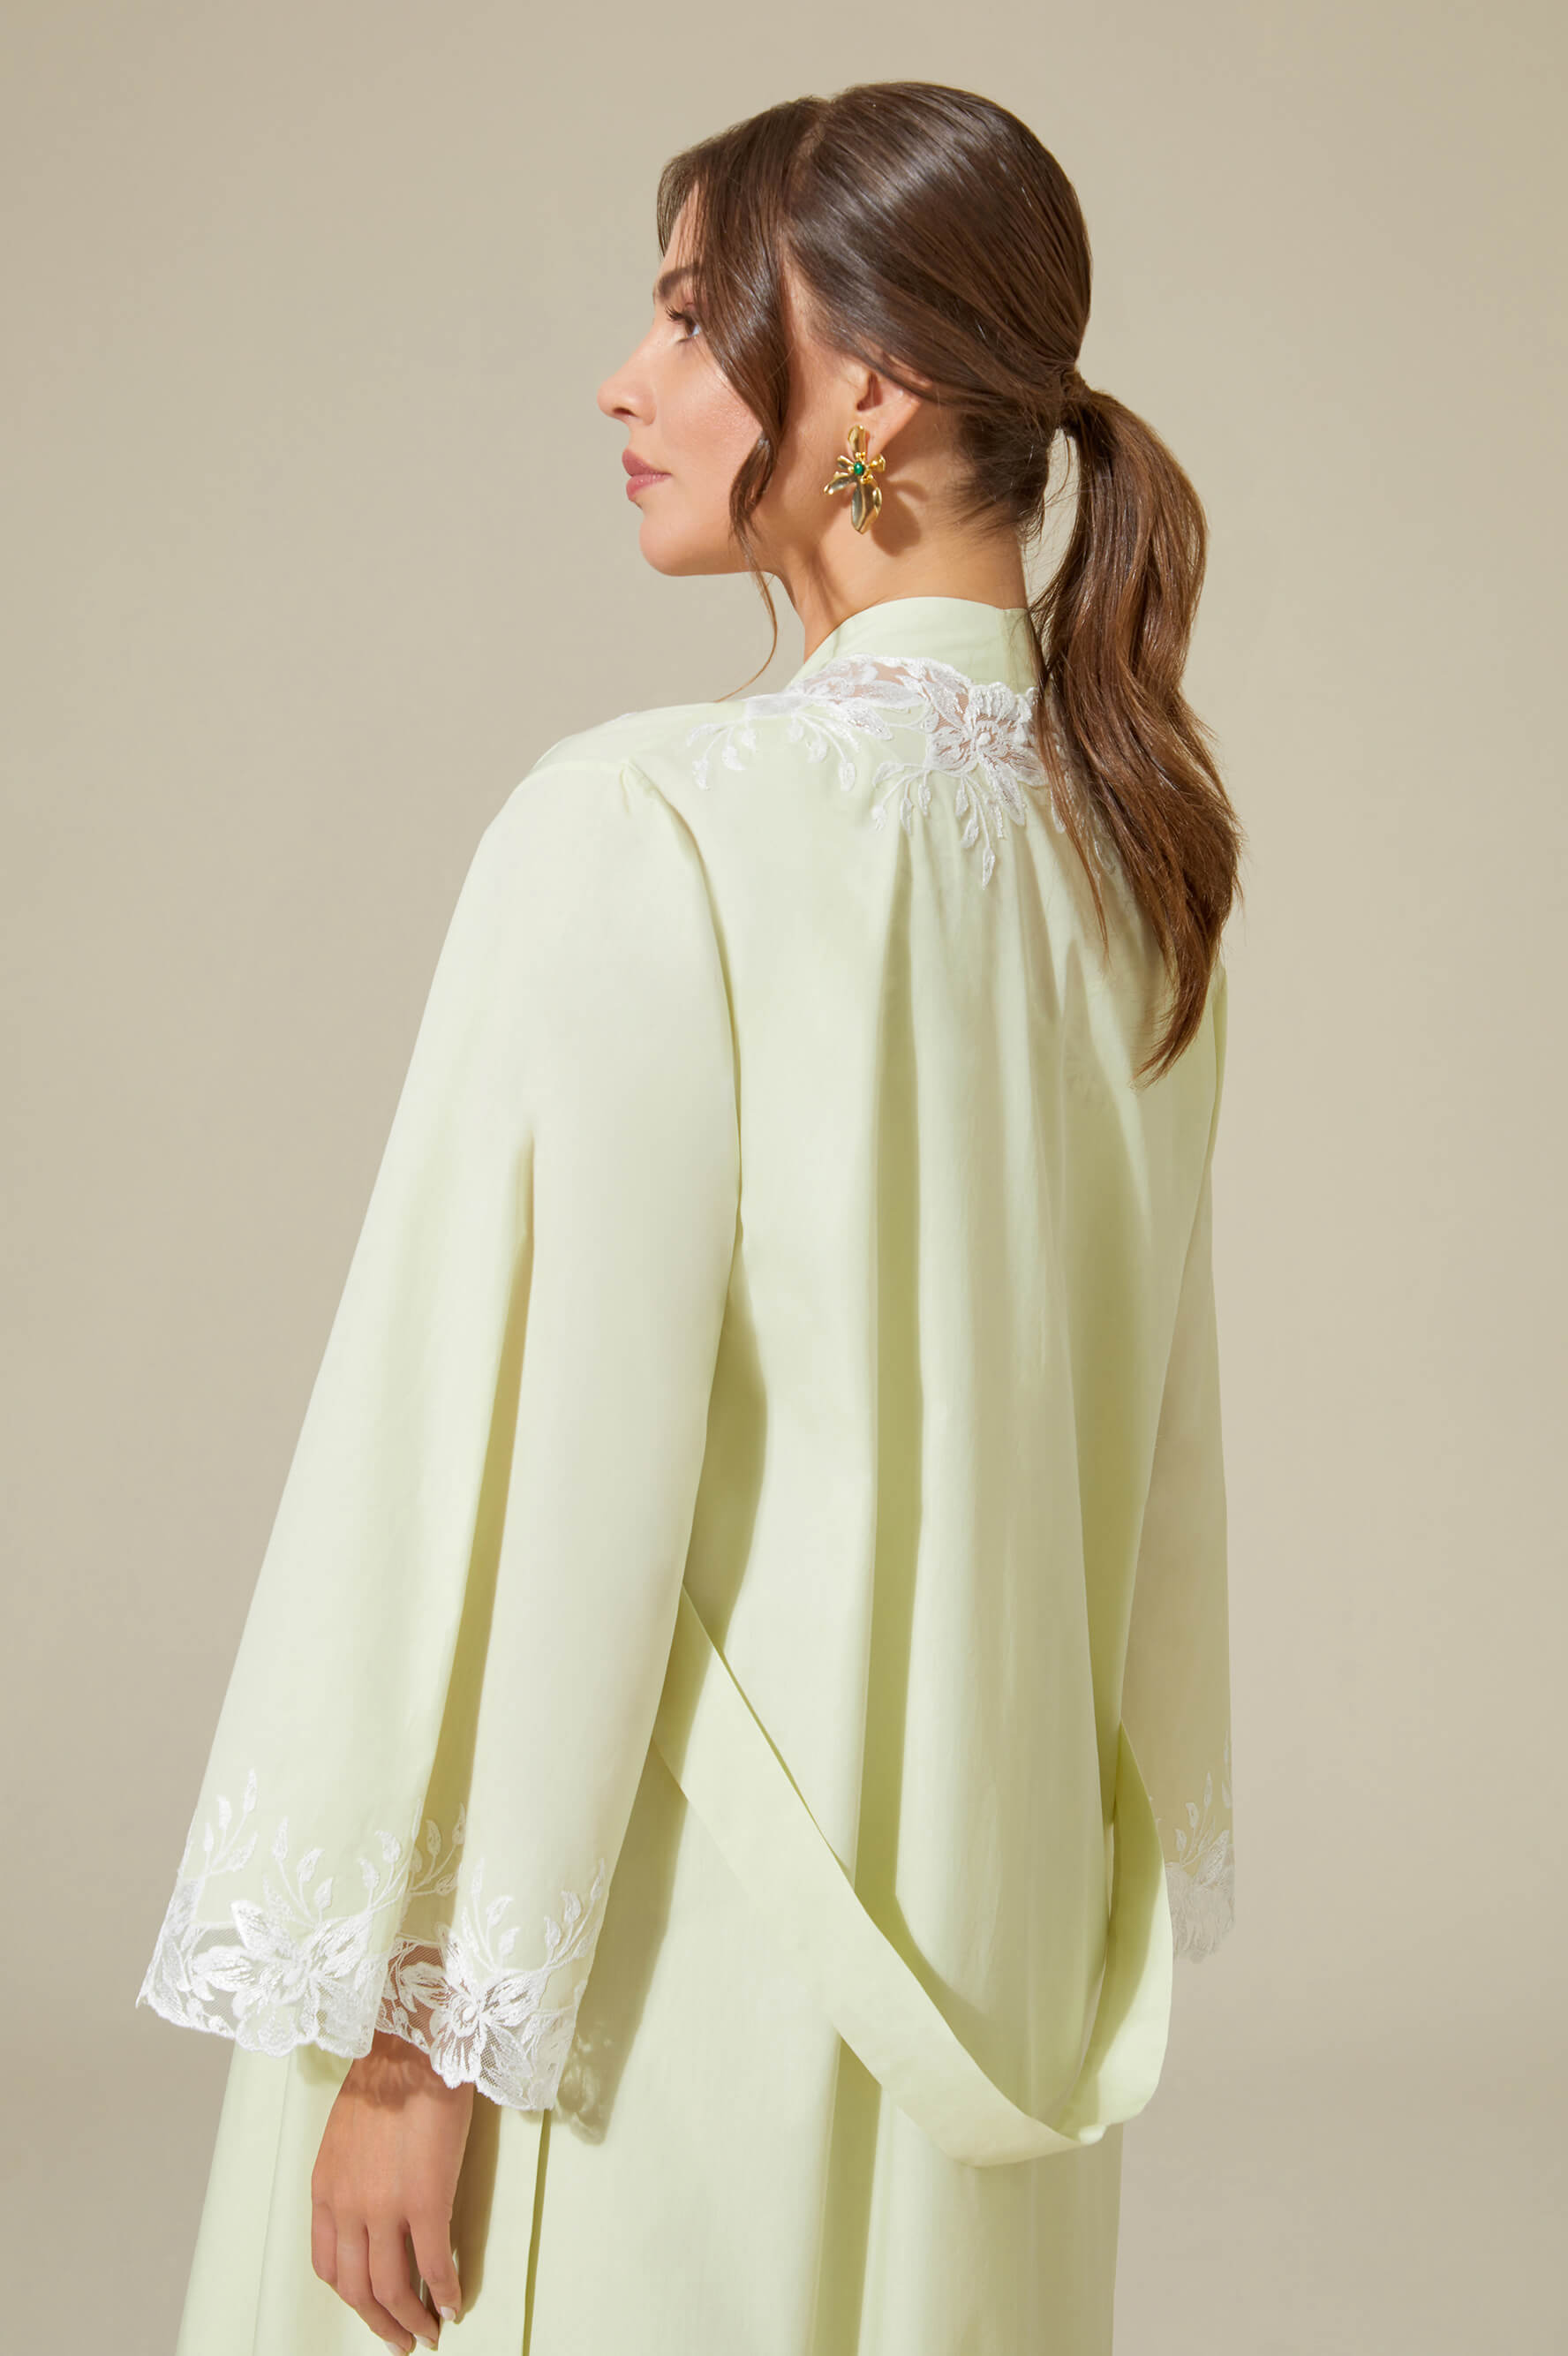 Maia - Trimmed Cotton Voile Long Sleeve Robe Set - Light Green